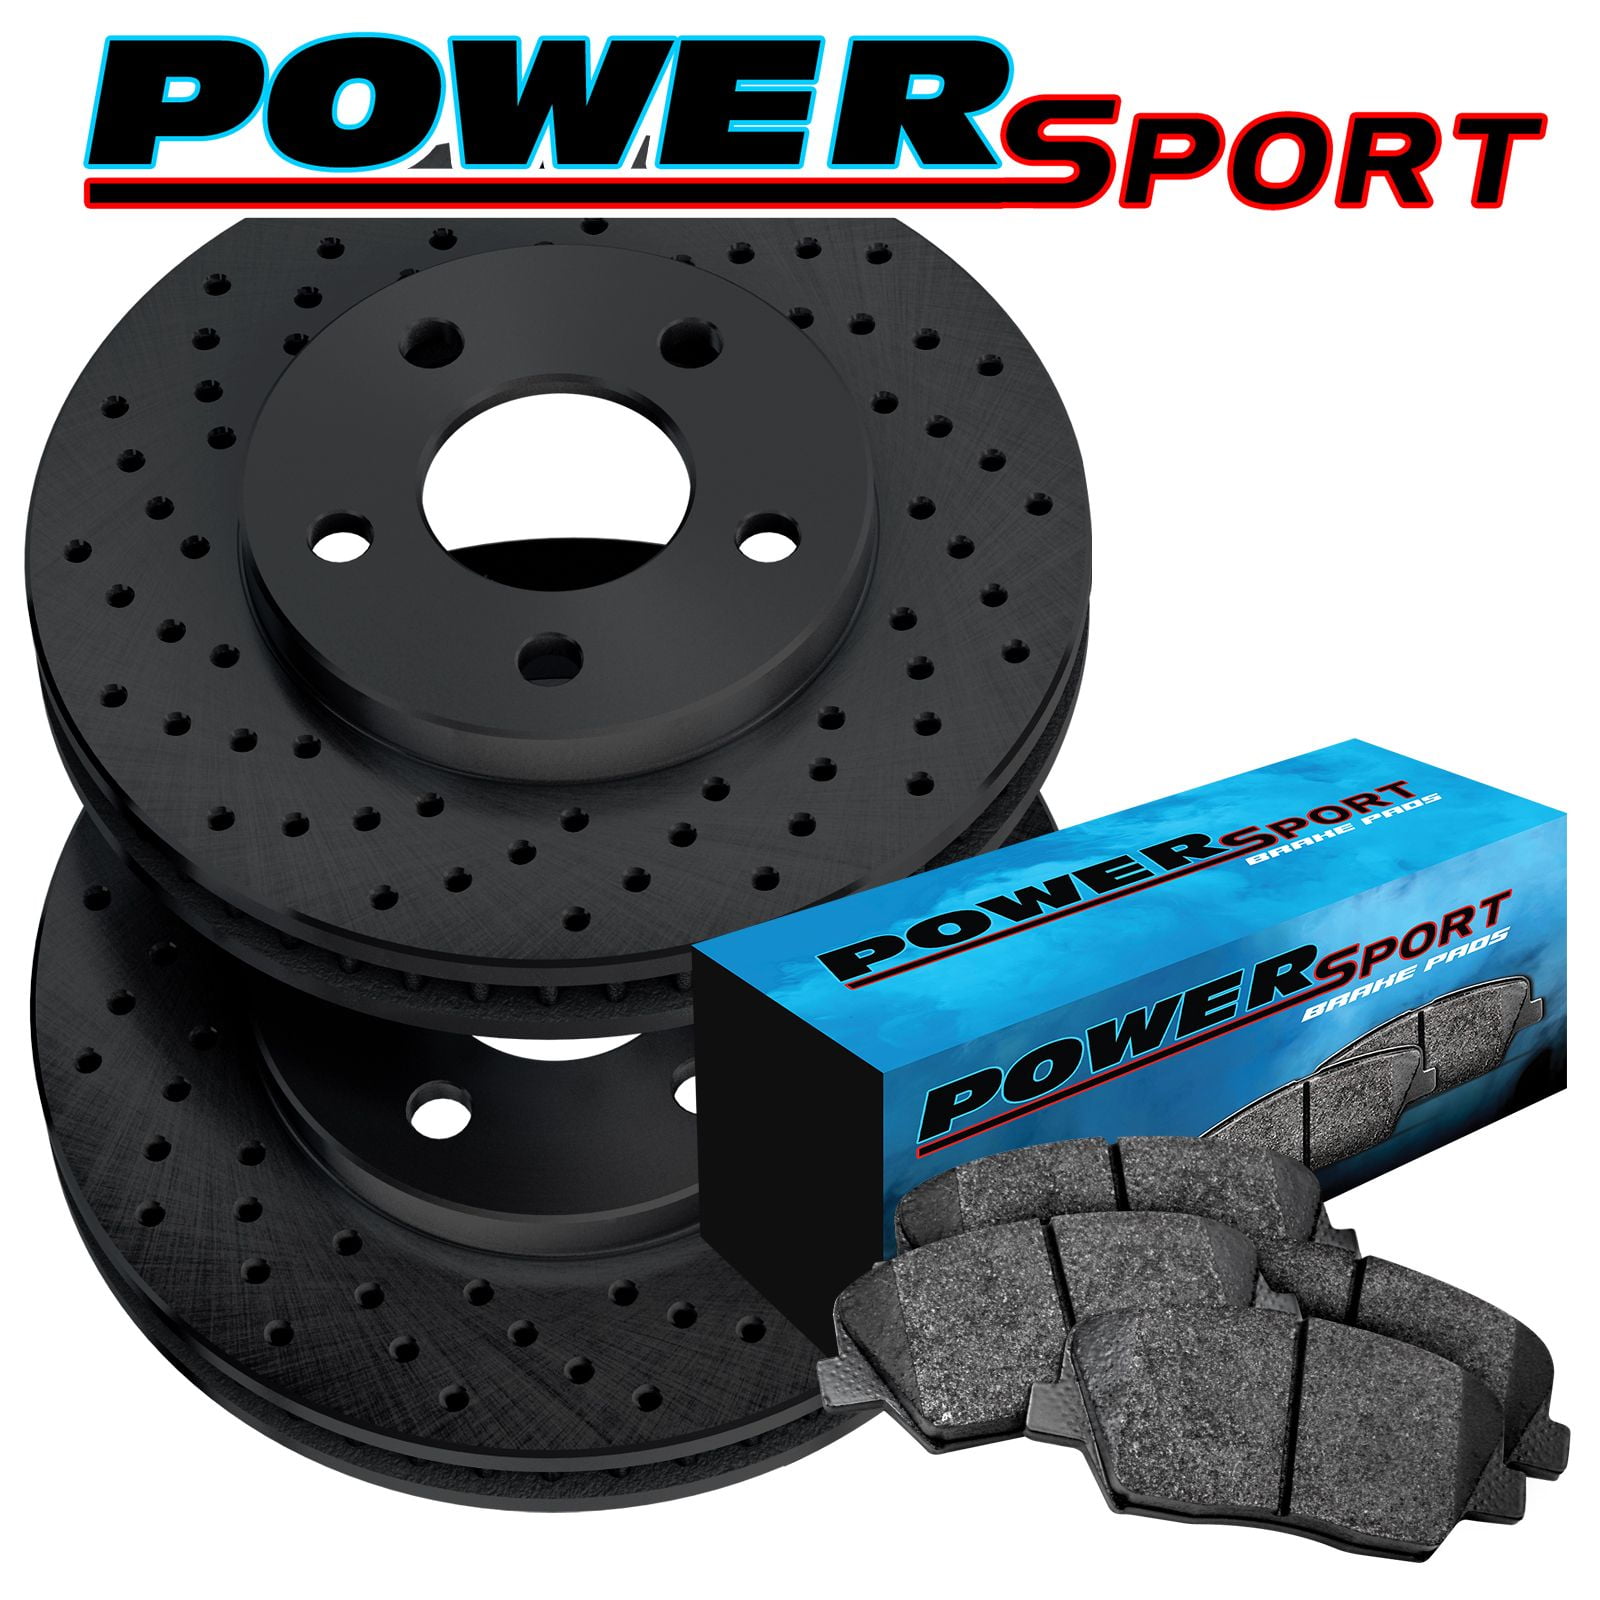 Full Kit Drilled Slotted Brake Rotors Disc and Ceramic Pads For 2000 GTX,Galant